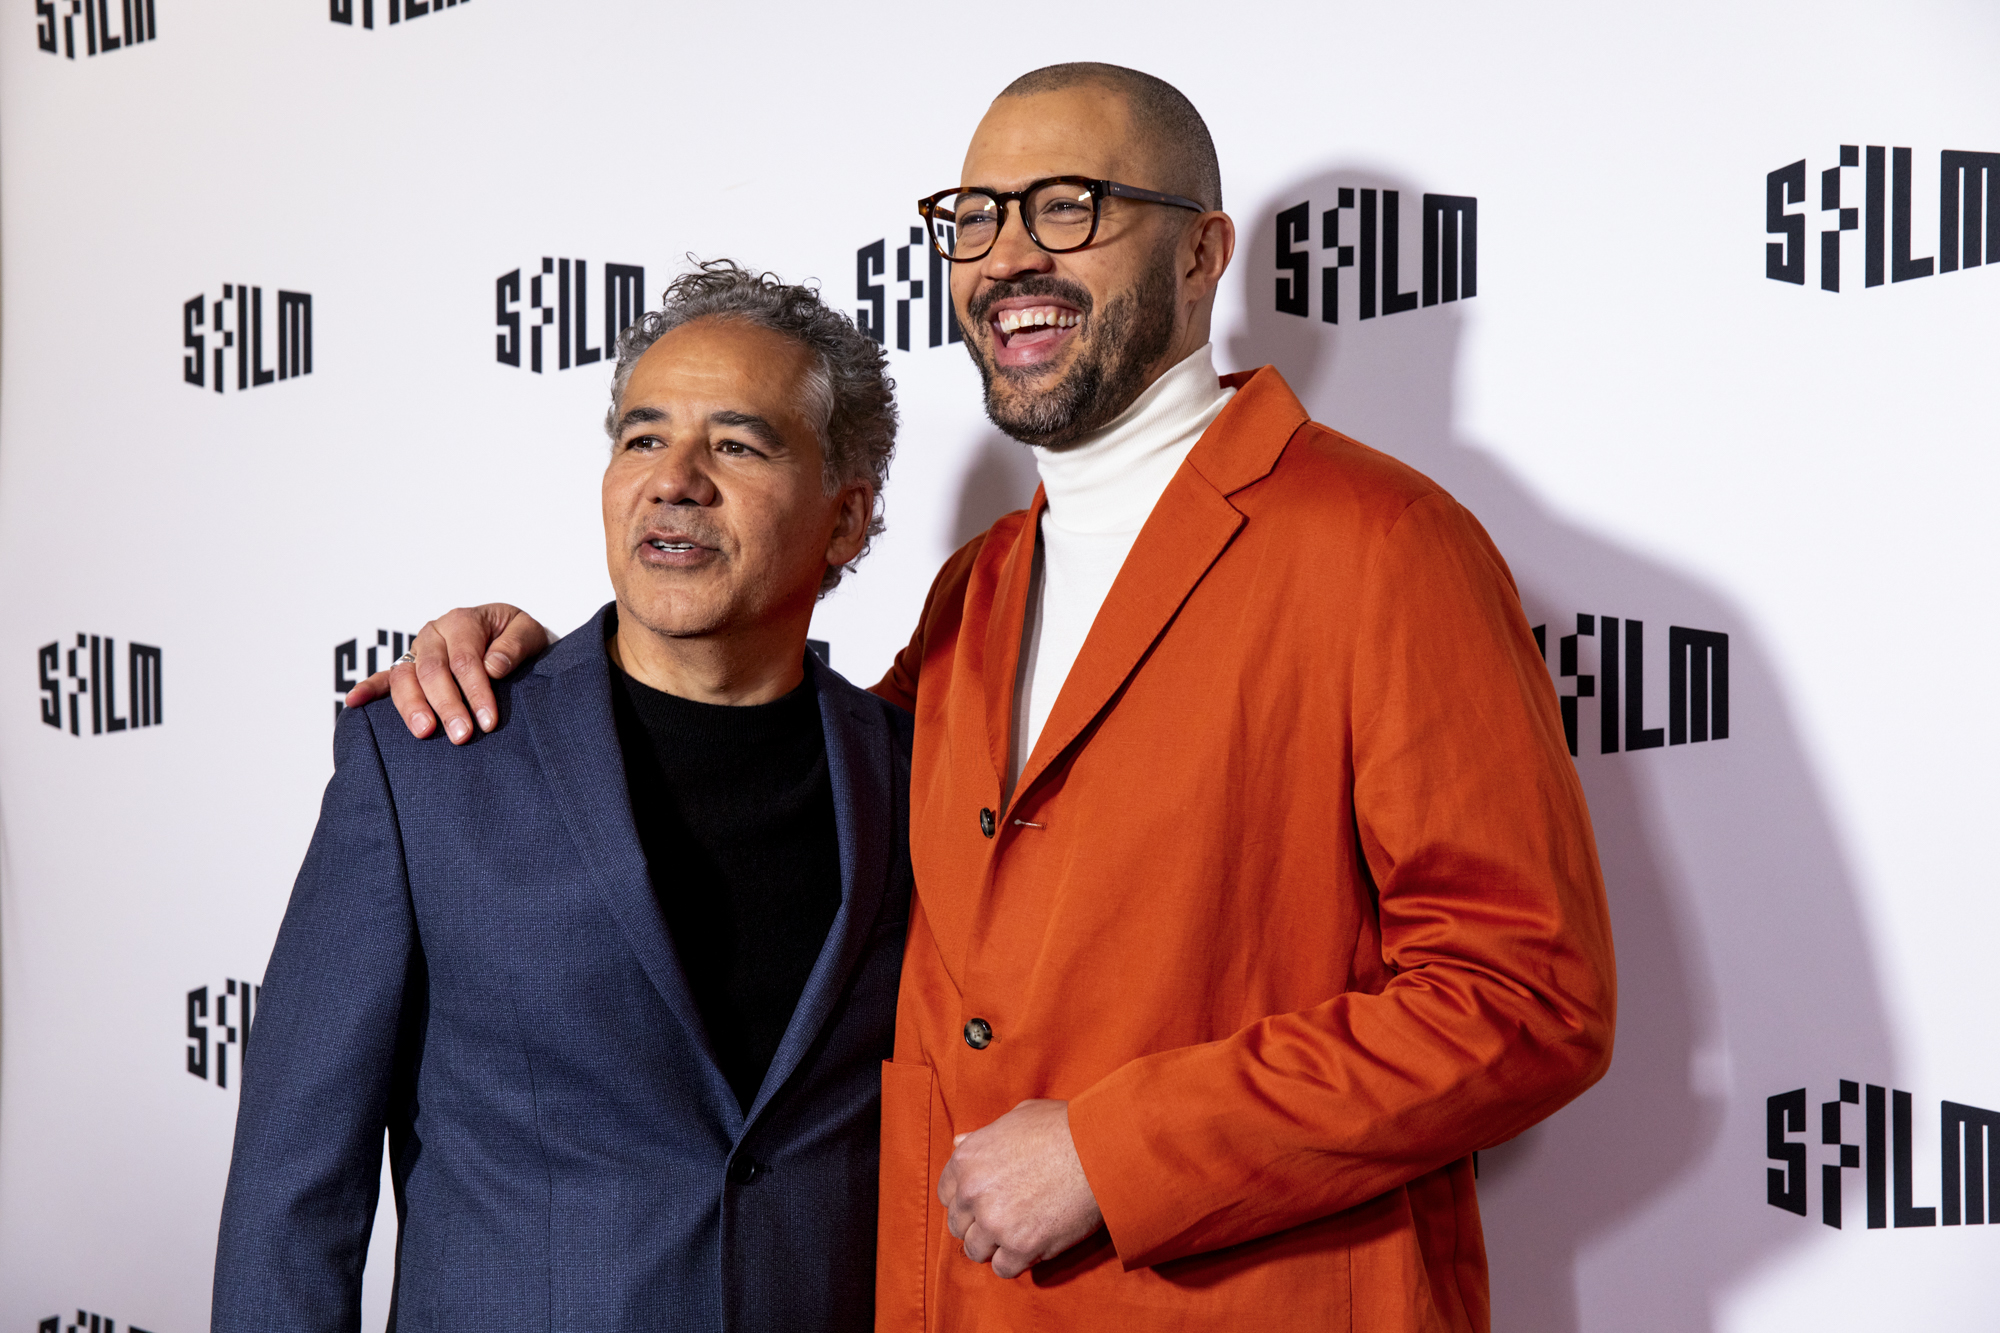 Two people wearing sport coats in front of a backdrop with the words "SFFILM" written on it.